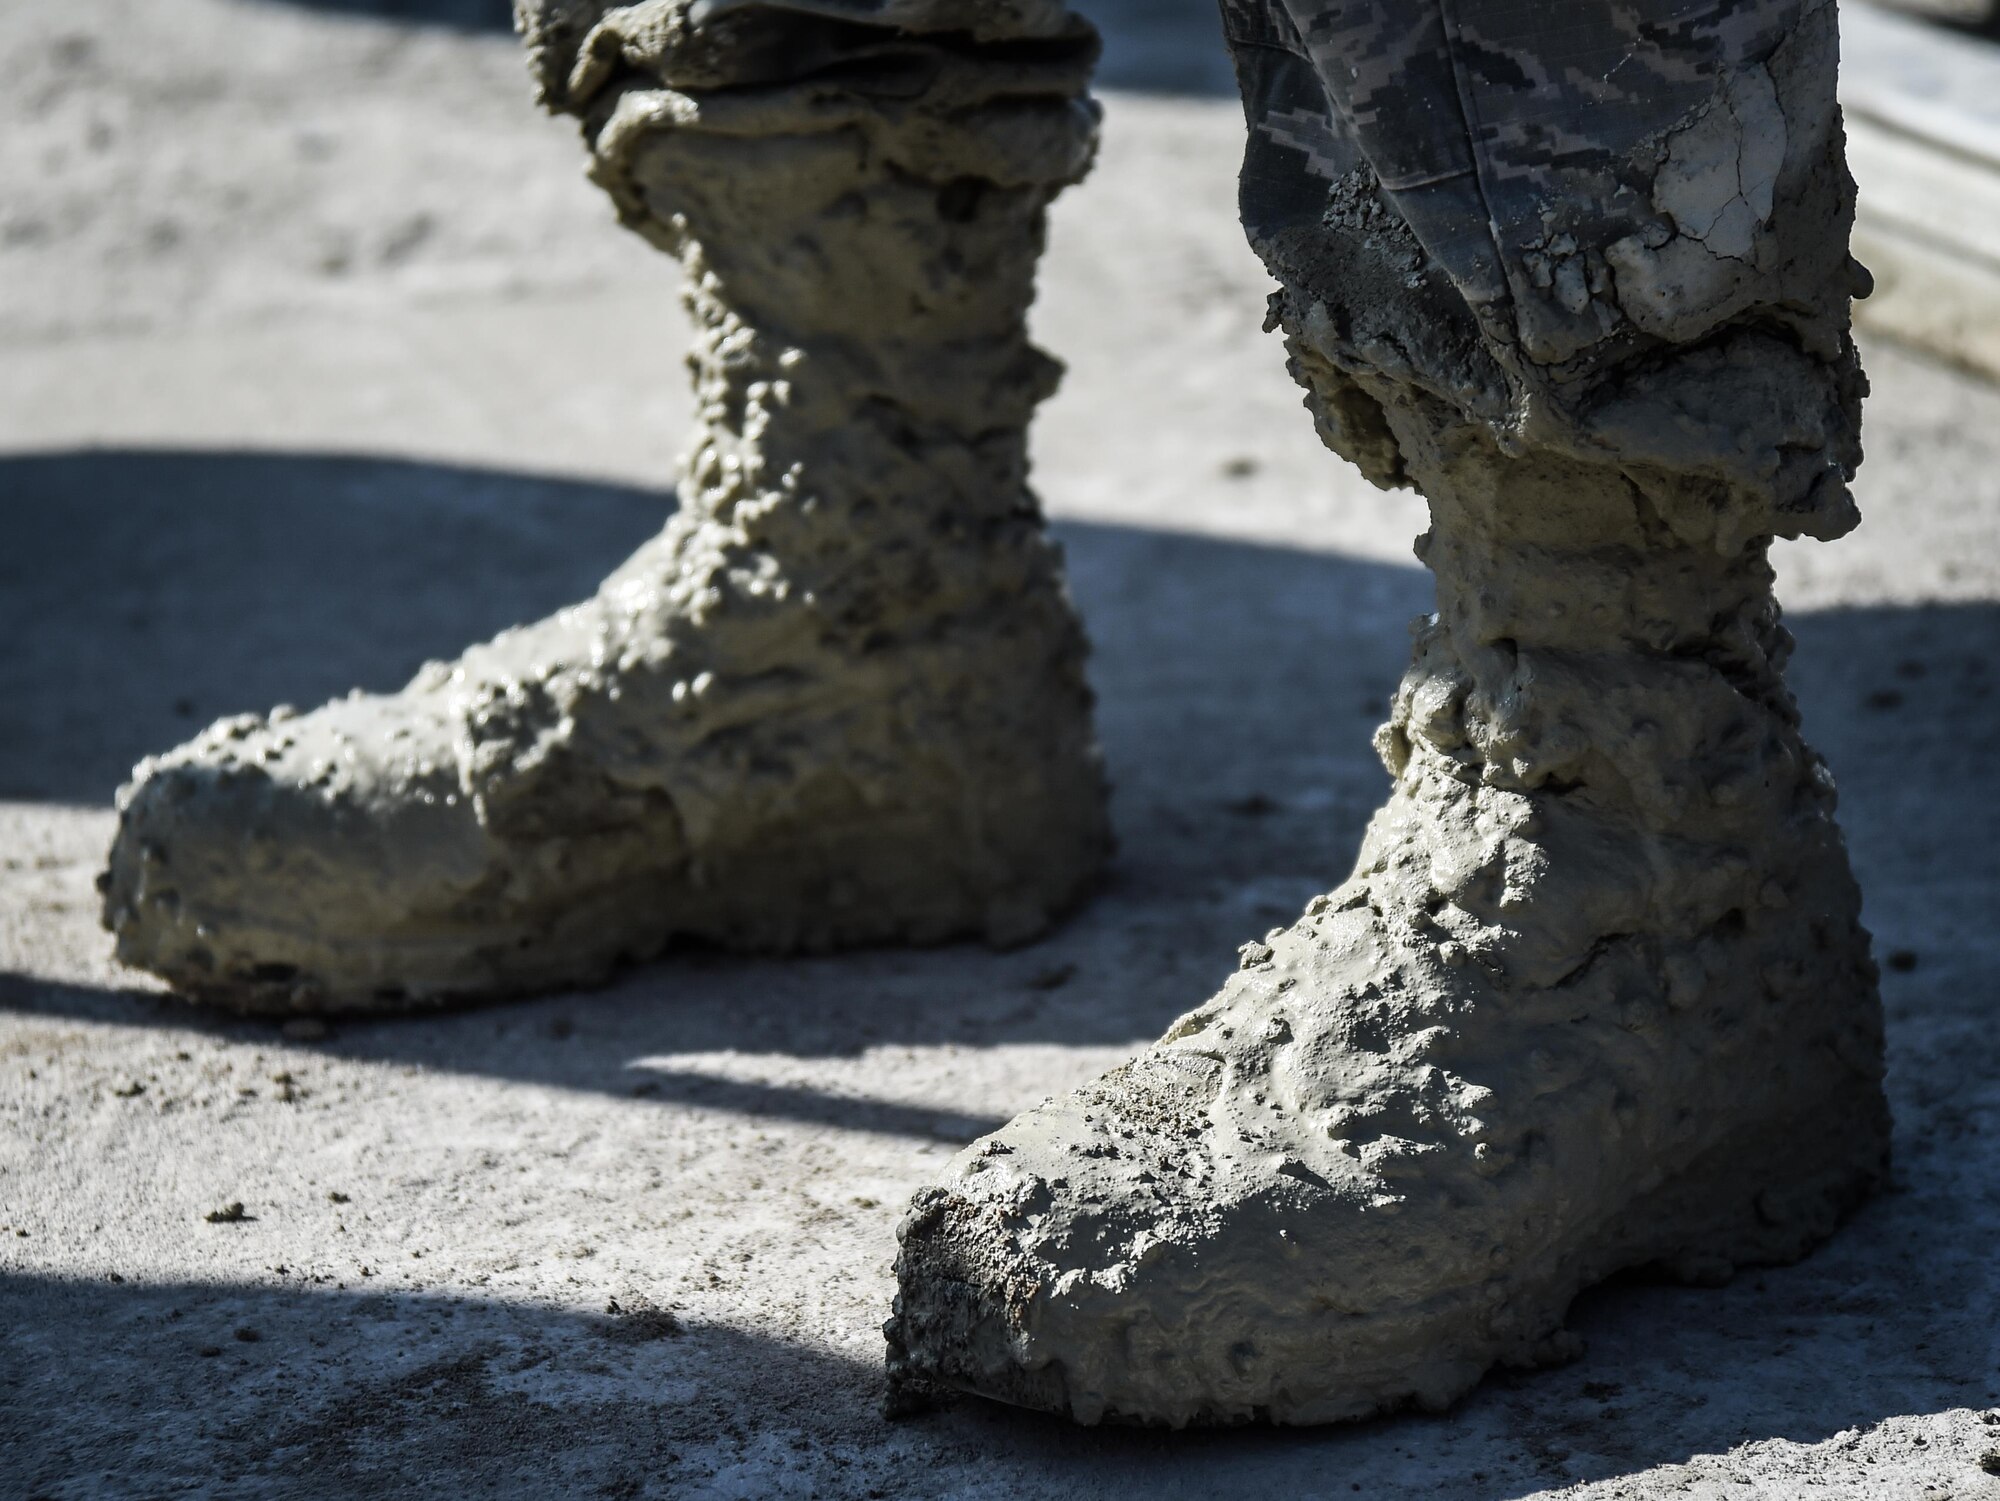 Concrete begins to cure on the boots of U.S. Air Force Airman 1st Class Ryan Williams, 773d Civil Engineer Squadron, after a Rapid Airfield Damage Repair training exercise at Gwangju Air Base, Republic of Korea., Nov. 9, 2017. U.S. and R.O.K. Airmen trained together for a week to learn the new RADR process, preparing them for response to wartime contingencies, enhancing interoperability and building partnership capacity in the Indo-Asia Pacific region. The civil engineers teamed up to complete an airfield damage repair exercise on a mock airstrip with multiple craters, testing the team's ability to restore a runway to operational status as quickly as possible. (U.S. Air Force photo by Senior Airman Curt Beach)